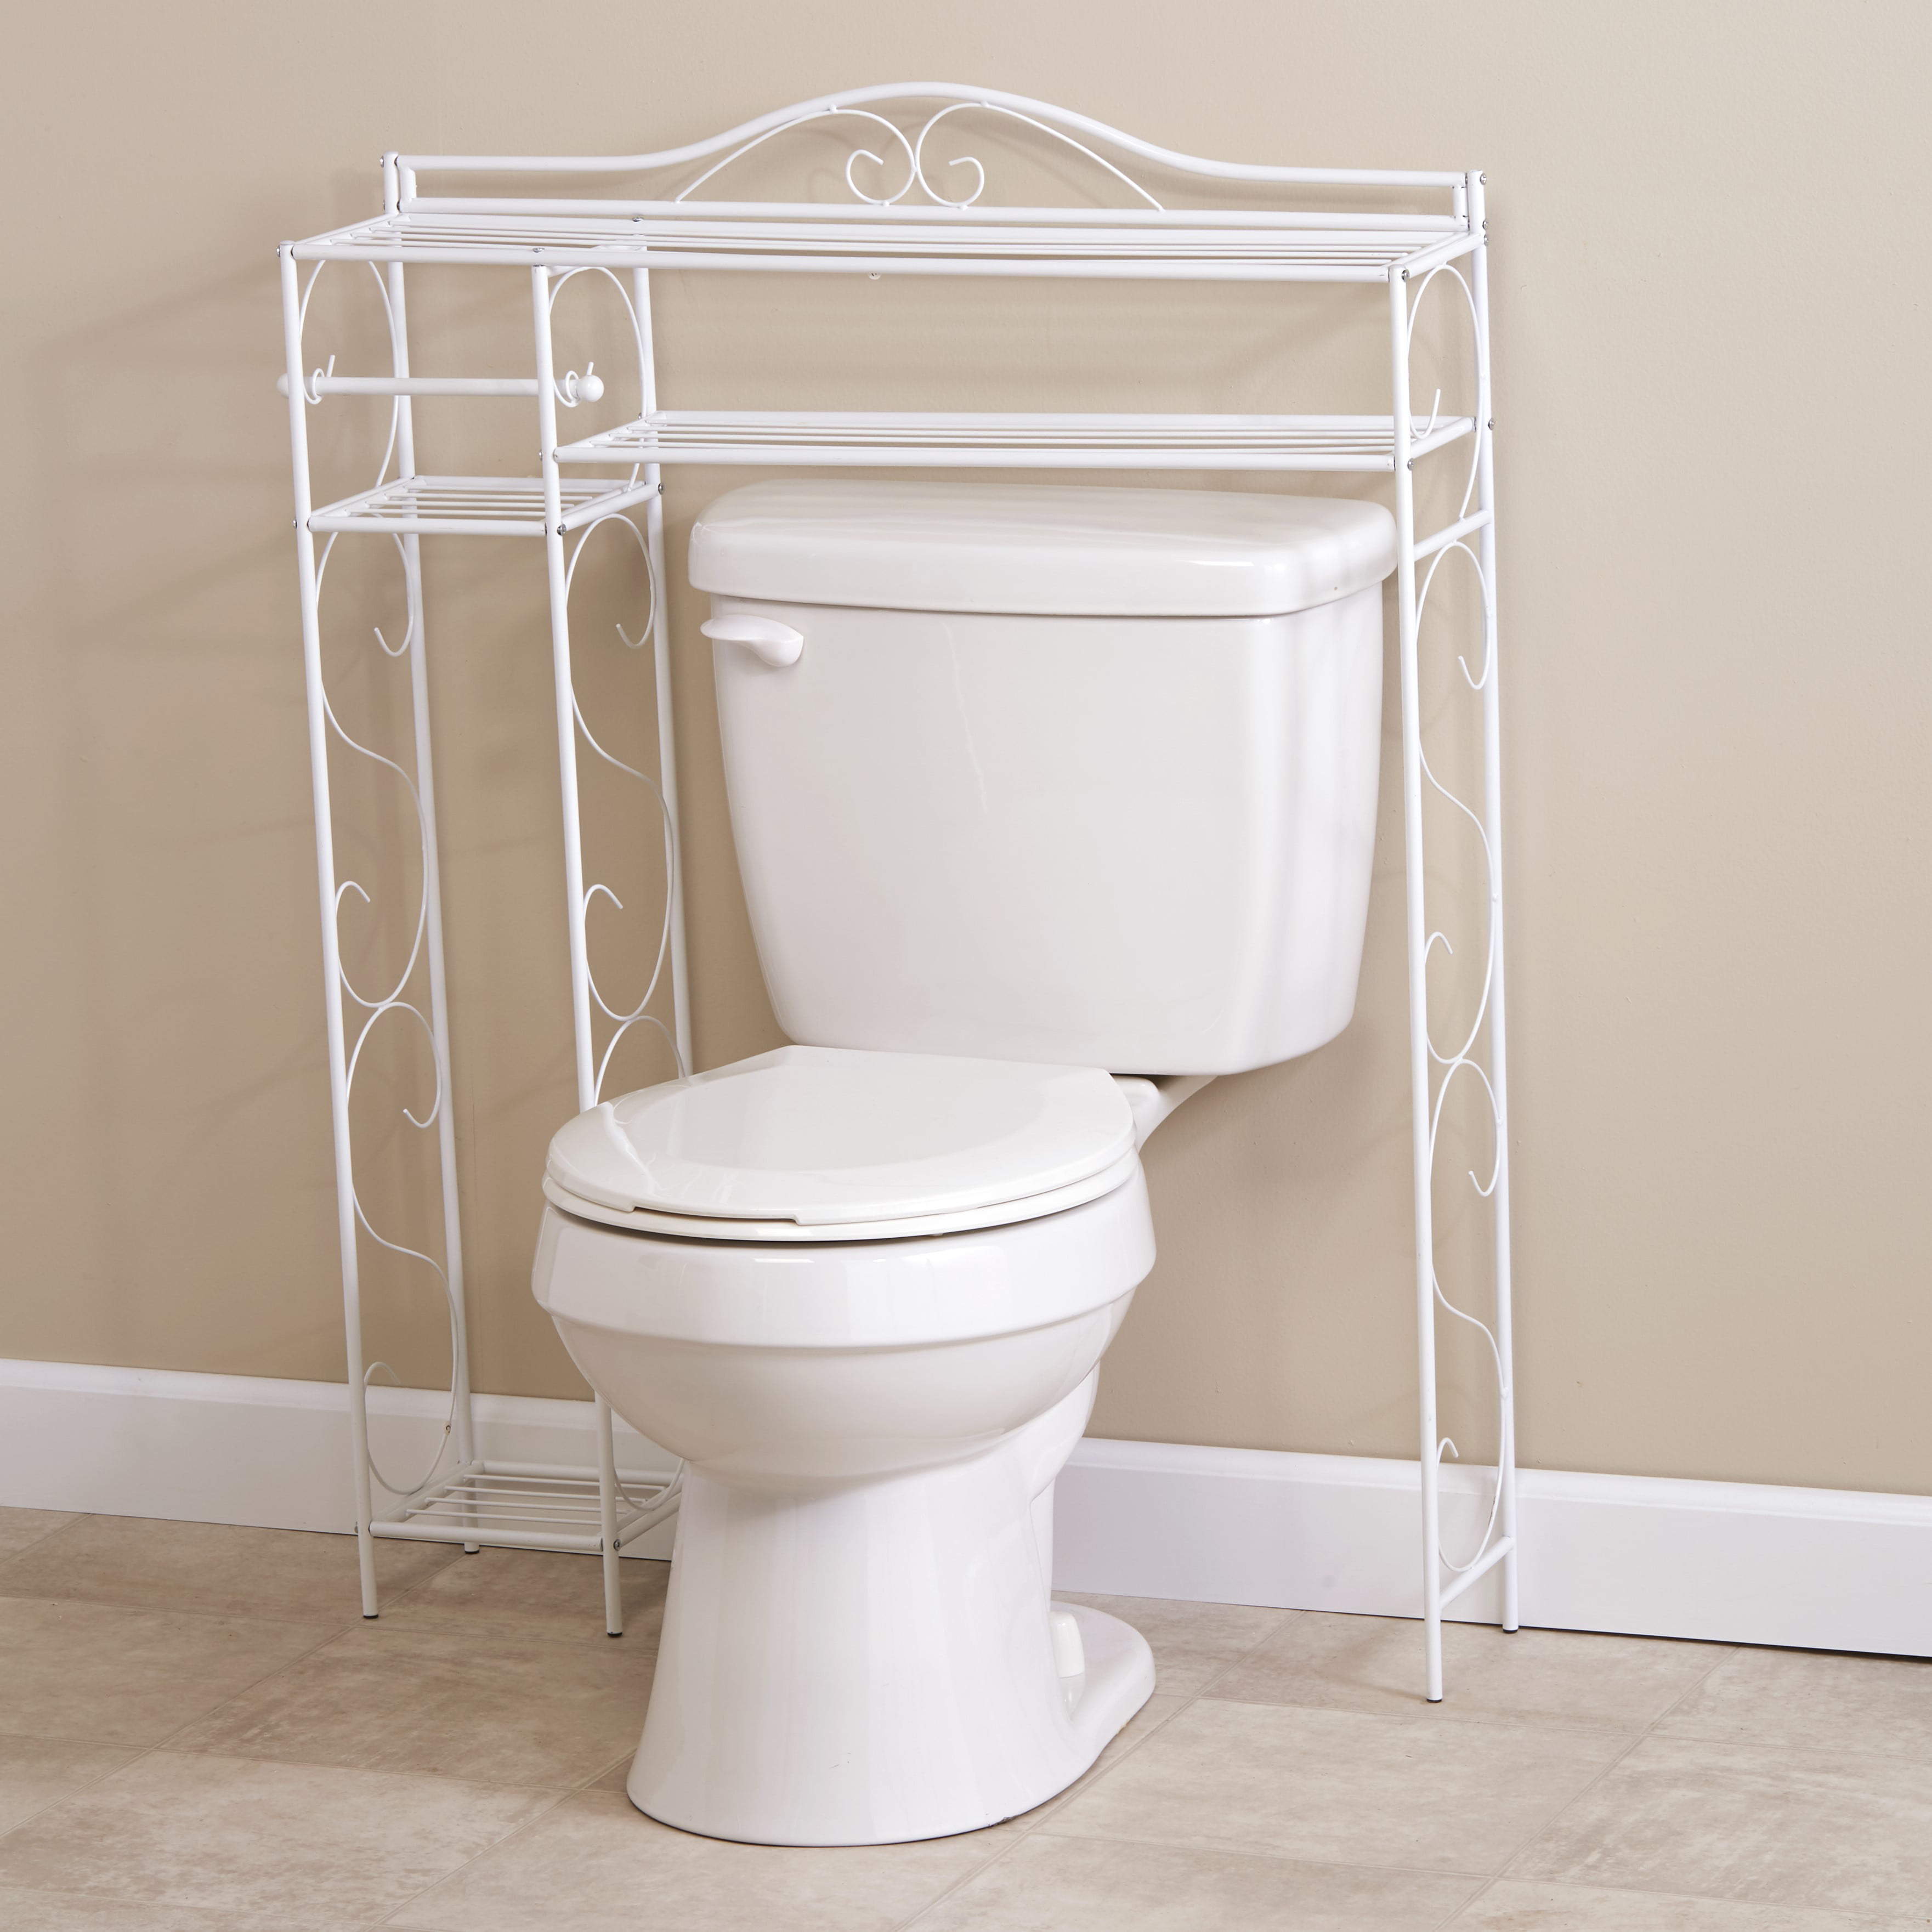 Over the Toilet Space Saver Storage Rack with 4 Shelves